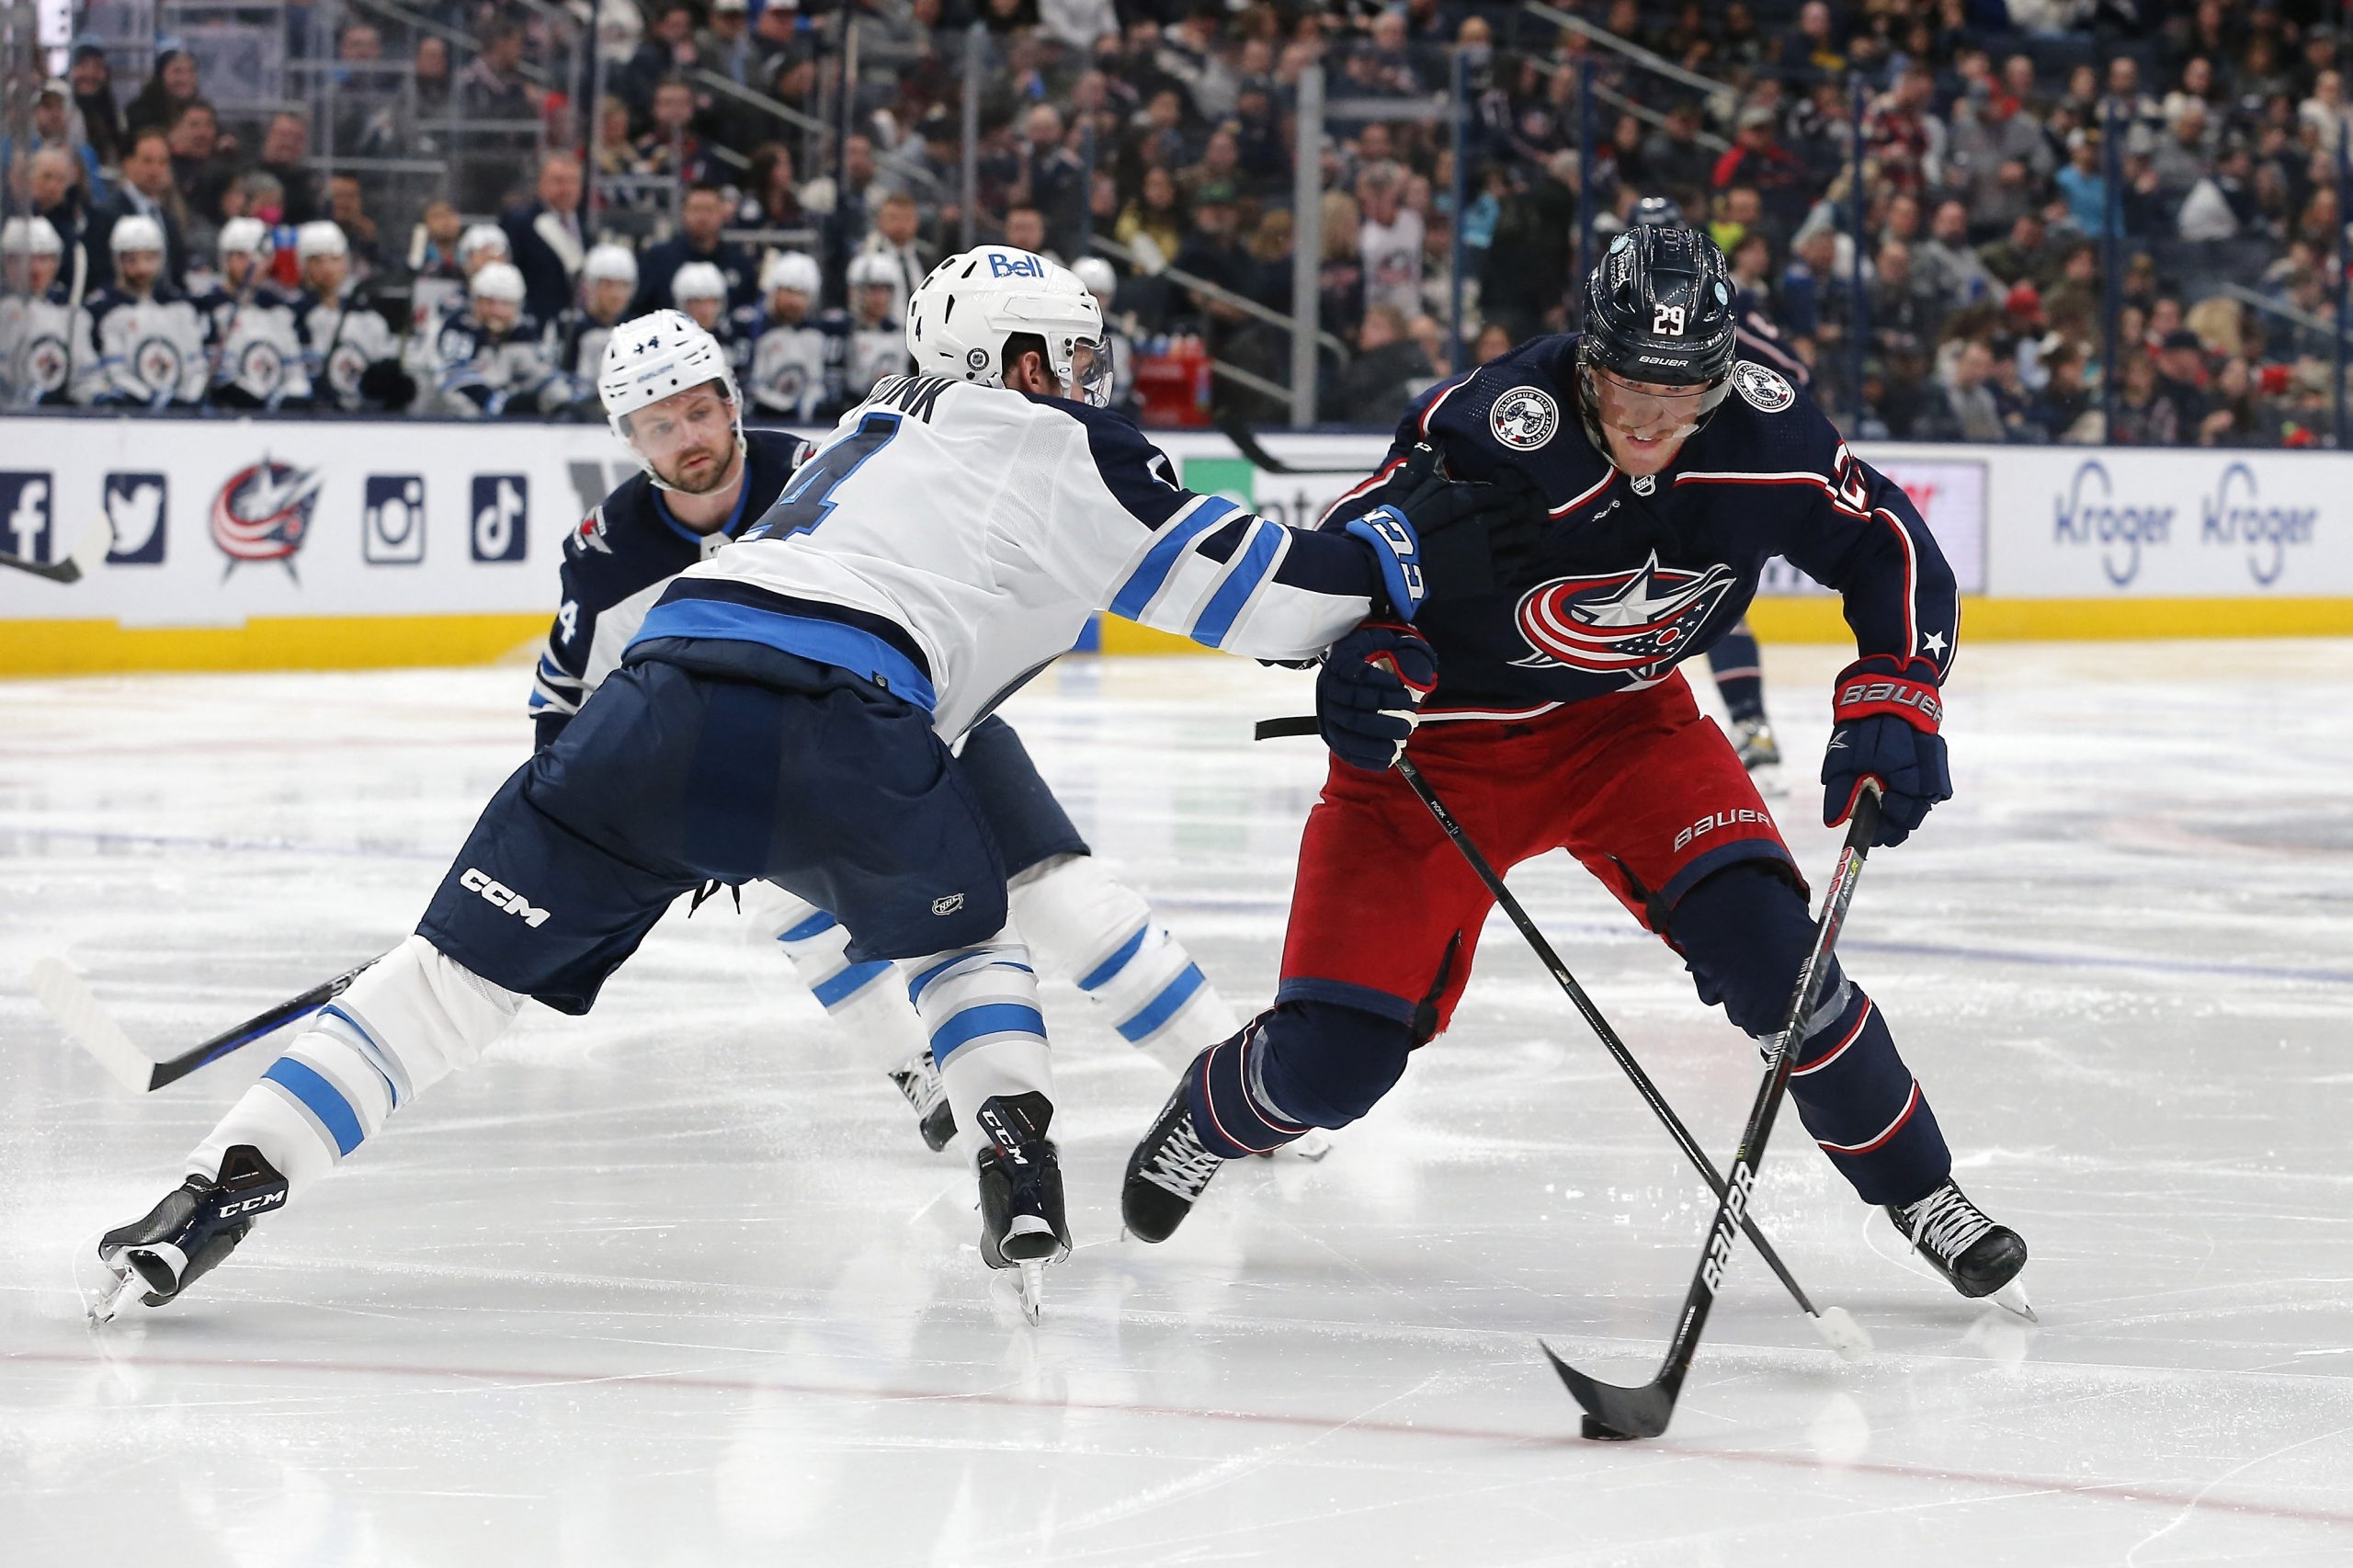 Jets shut out Blue Jackets for 7th straight win, push point streak